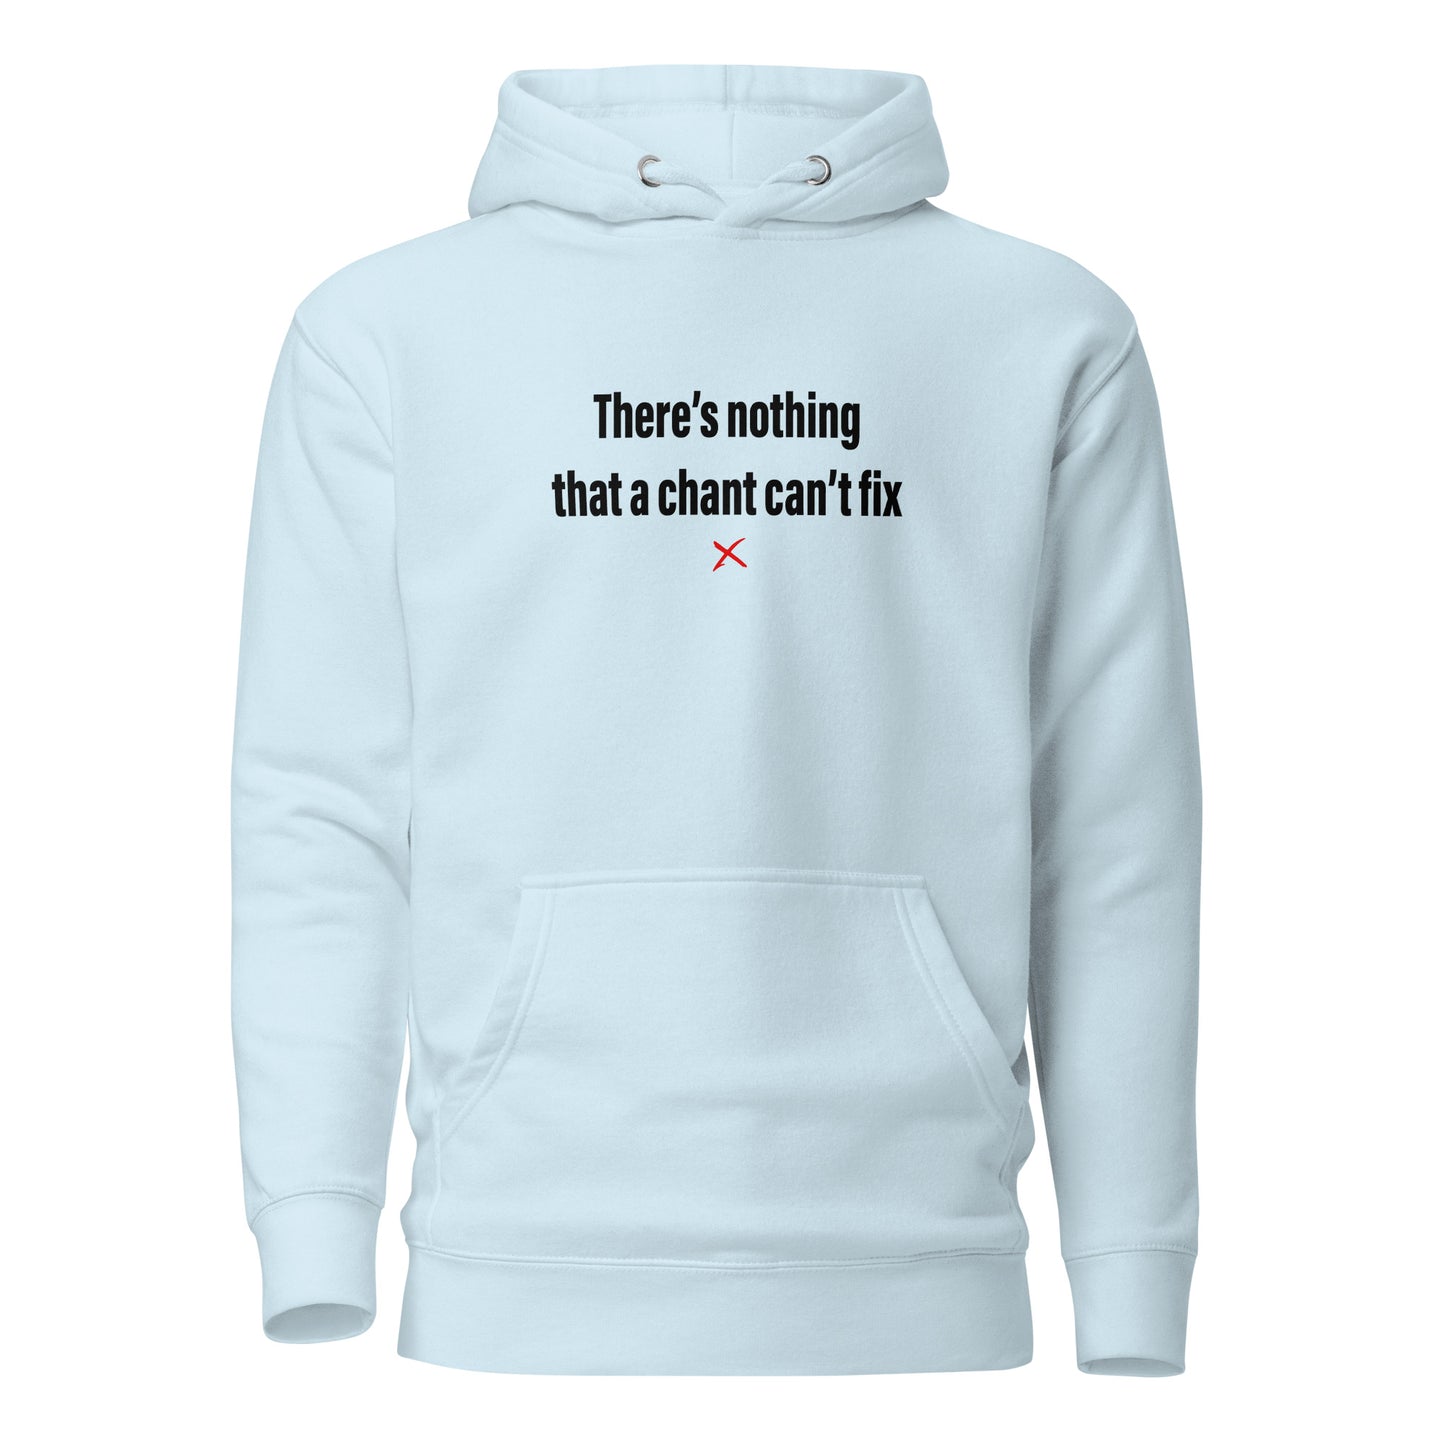 There's nothing that a chant can't fix - Hoodie